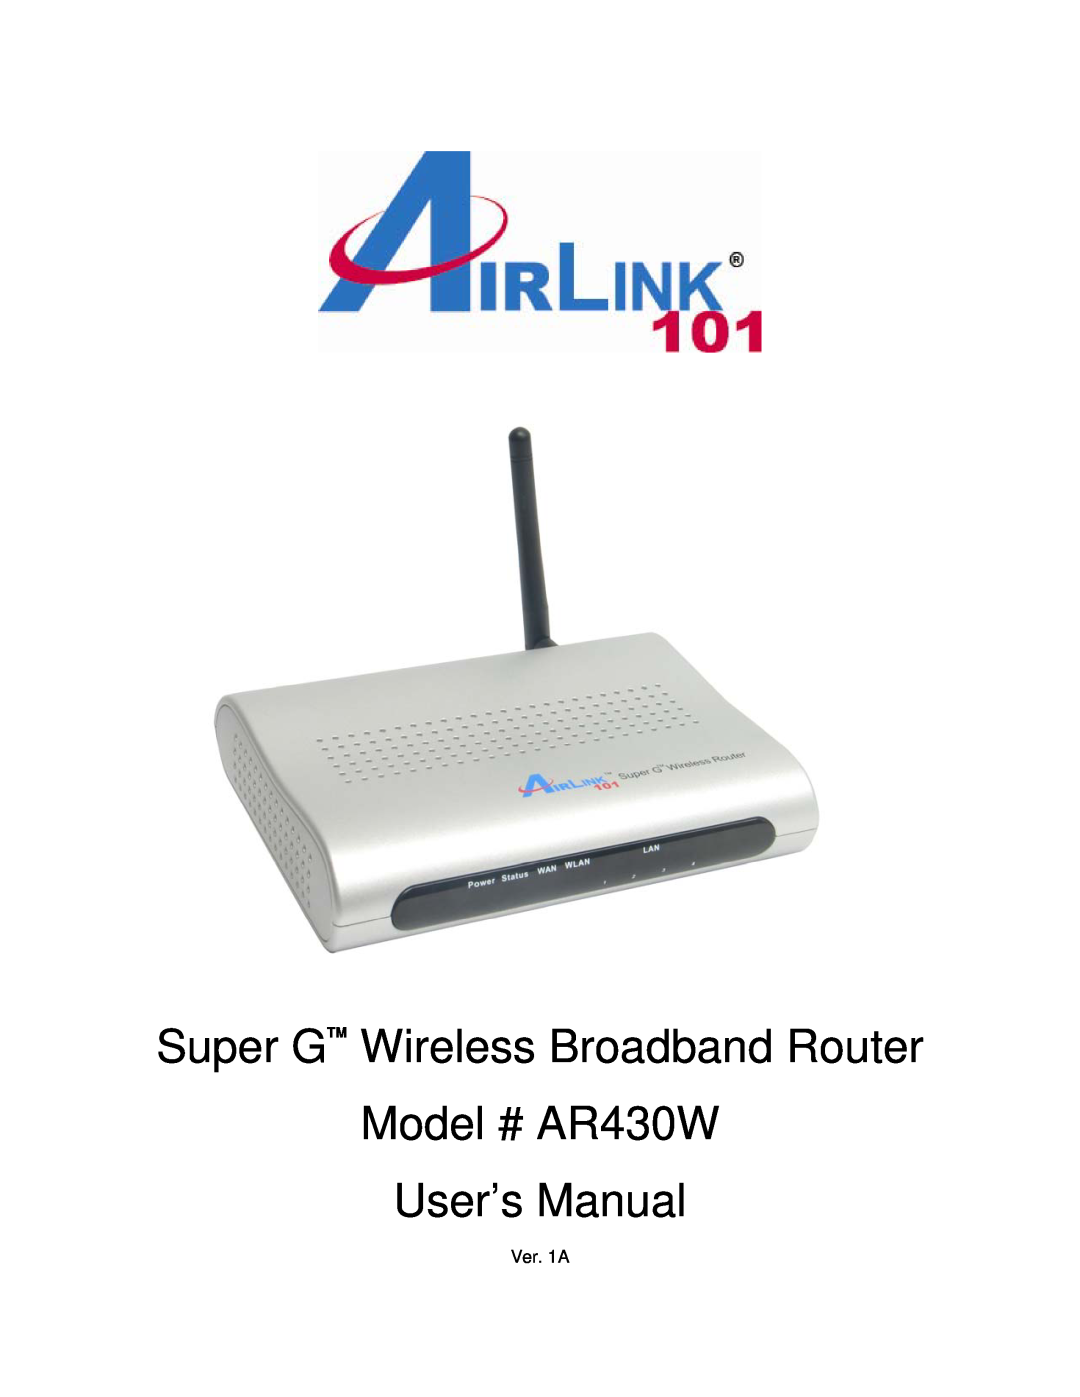 Airlink101 user manual Super GTM Wireless Broadband Router, Model # AR430W User’s Manual, Ver. 1A 